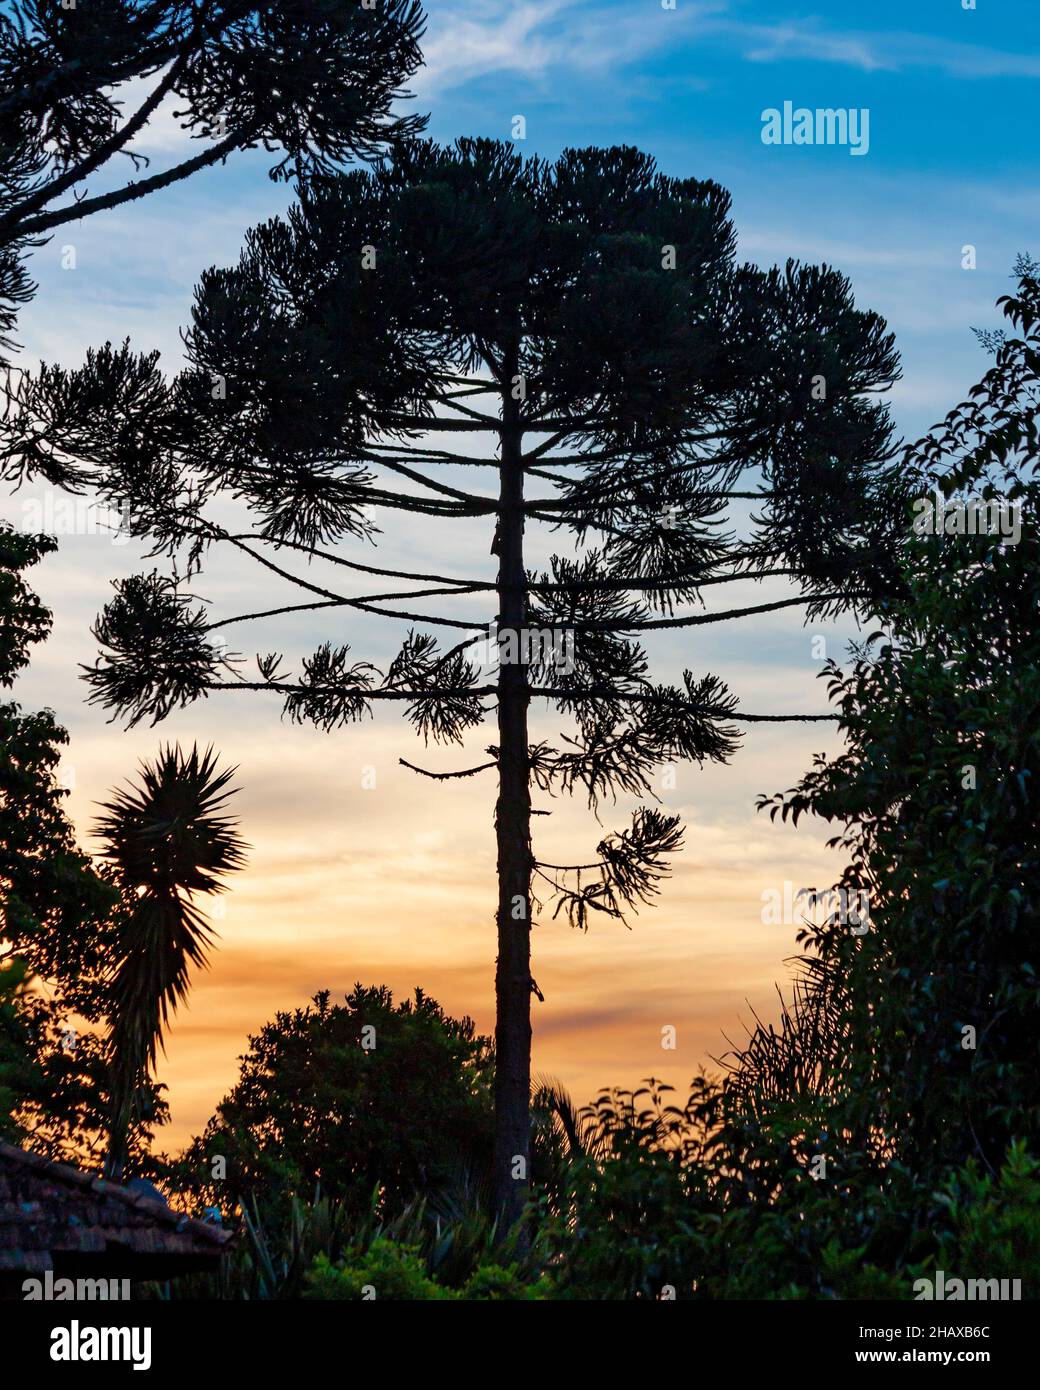 Silhouette of a Pine Araucaria at sunset (Parana Pine / Araucaria angustifolia / 'Araucária' in Brazil) Stock Photo